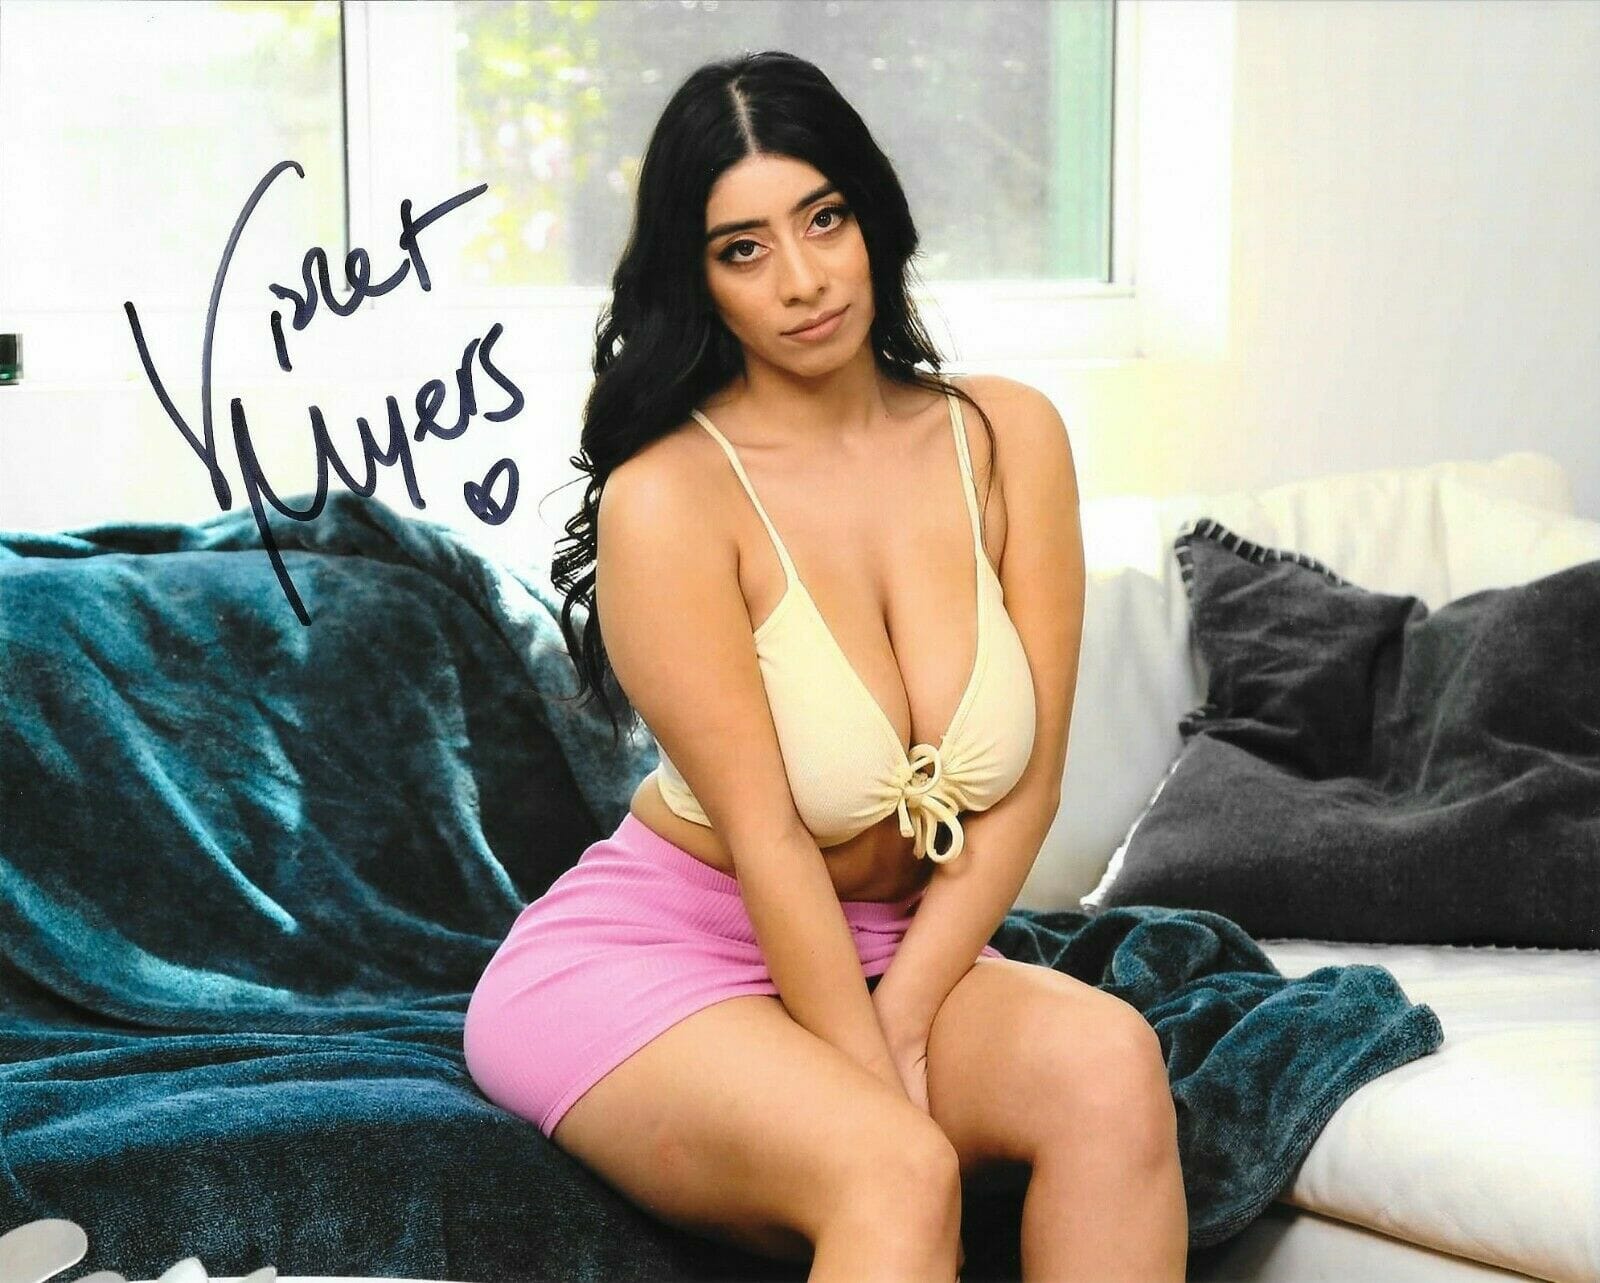 Violet Myers Adult Video Star signed Hot 8x10 photo autographed Proof #9  Opens in a new window or tab | Autographia